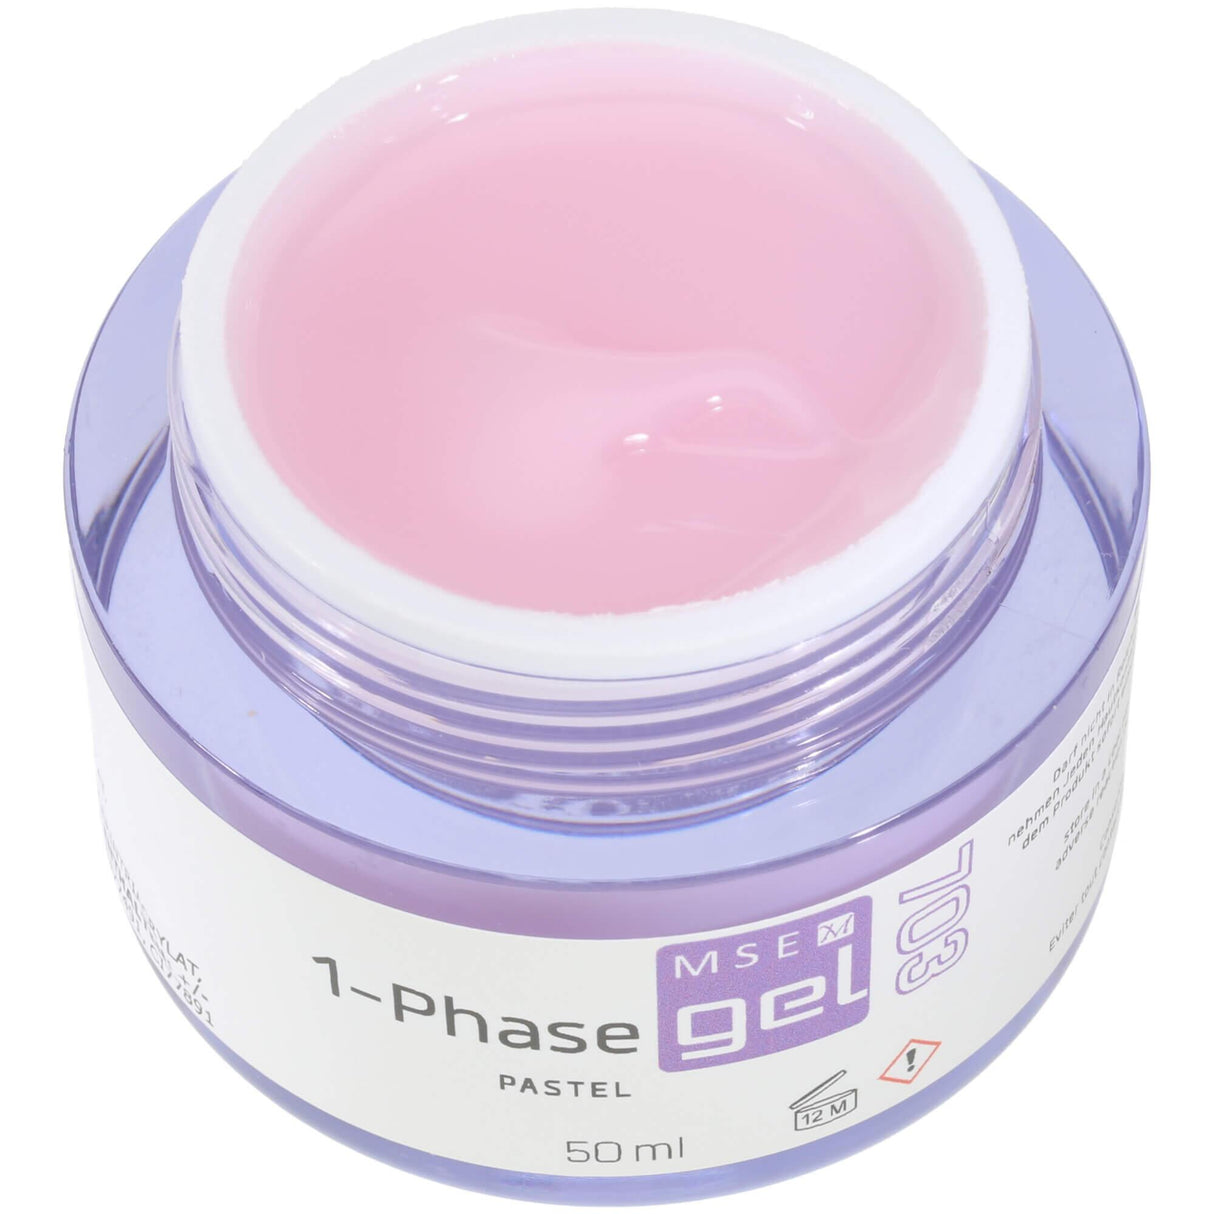 MSE Gel 703: 1-Phasengel Pastell / 1-Phase pastel 50ml - MSE - The Beauty Company